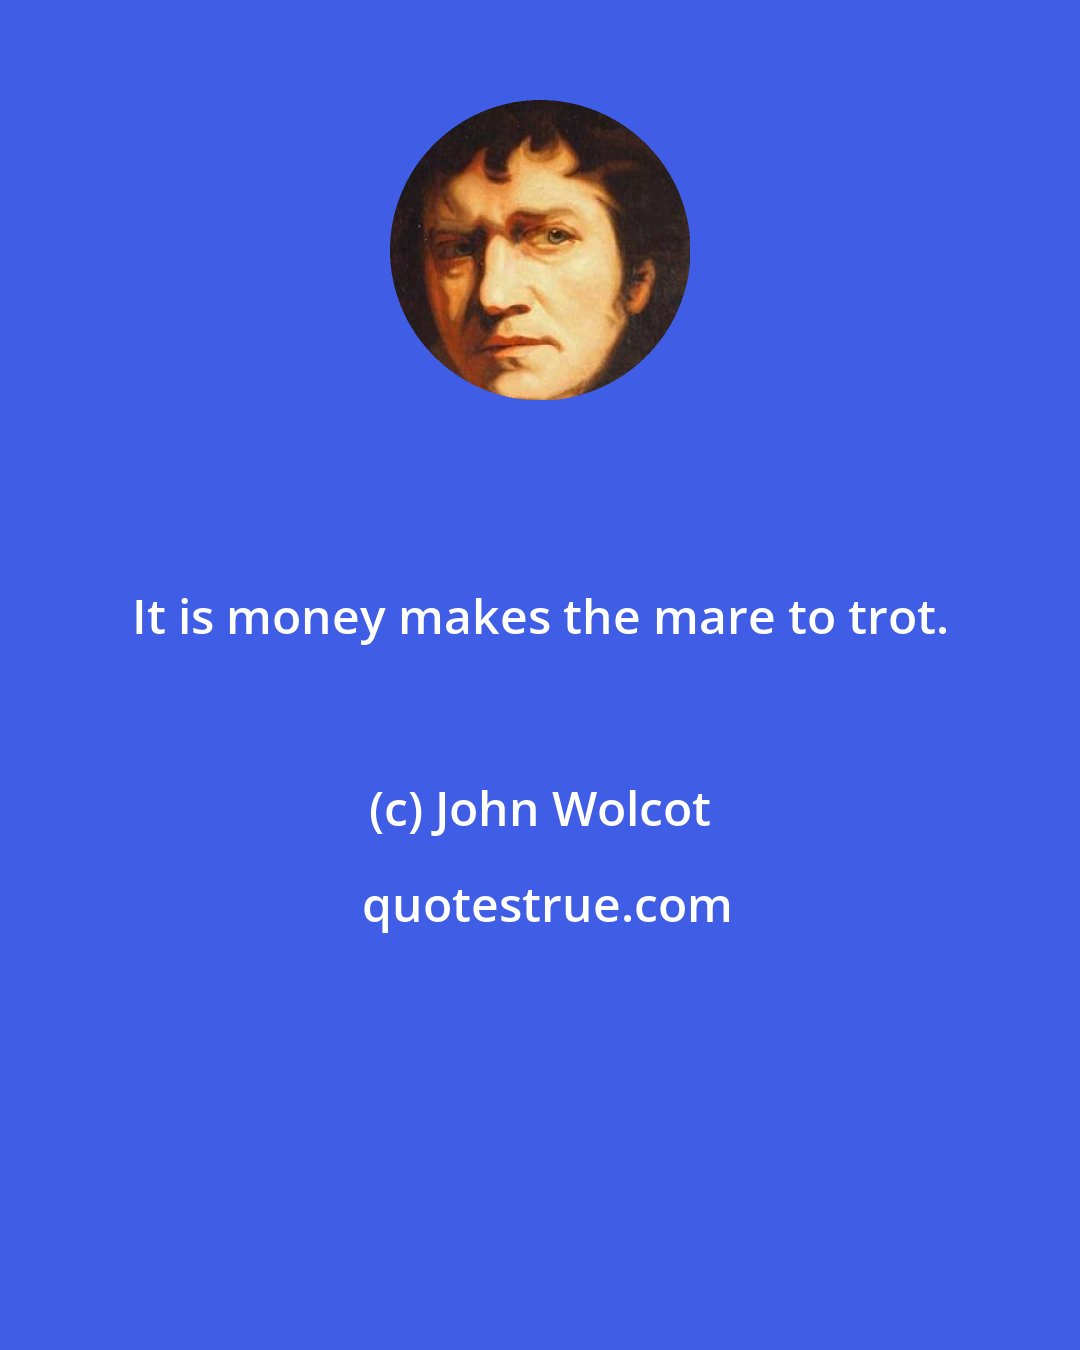 John Wolcot: It is money makes the mare to trot.